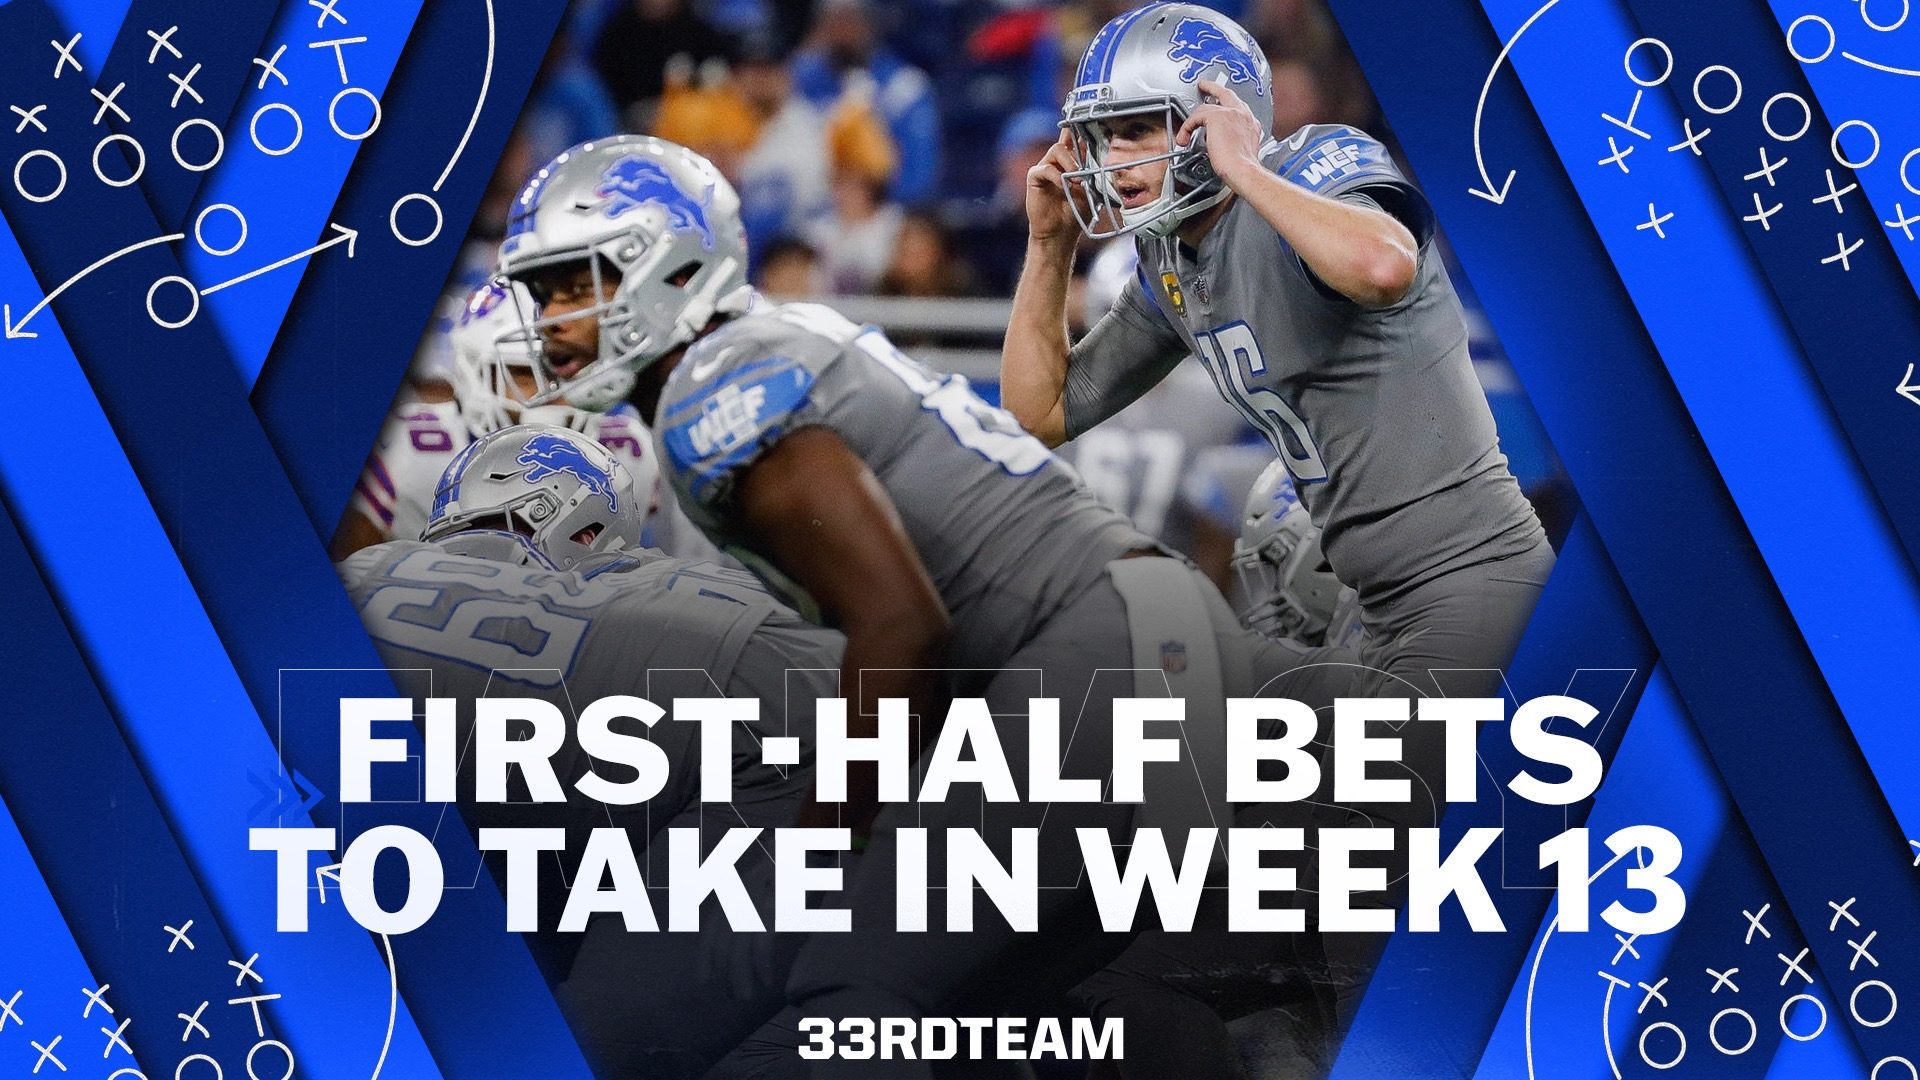 Two First-Half Bets to Take in Week 13